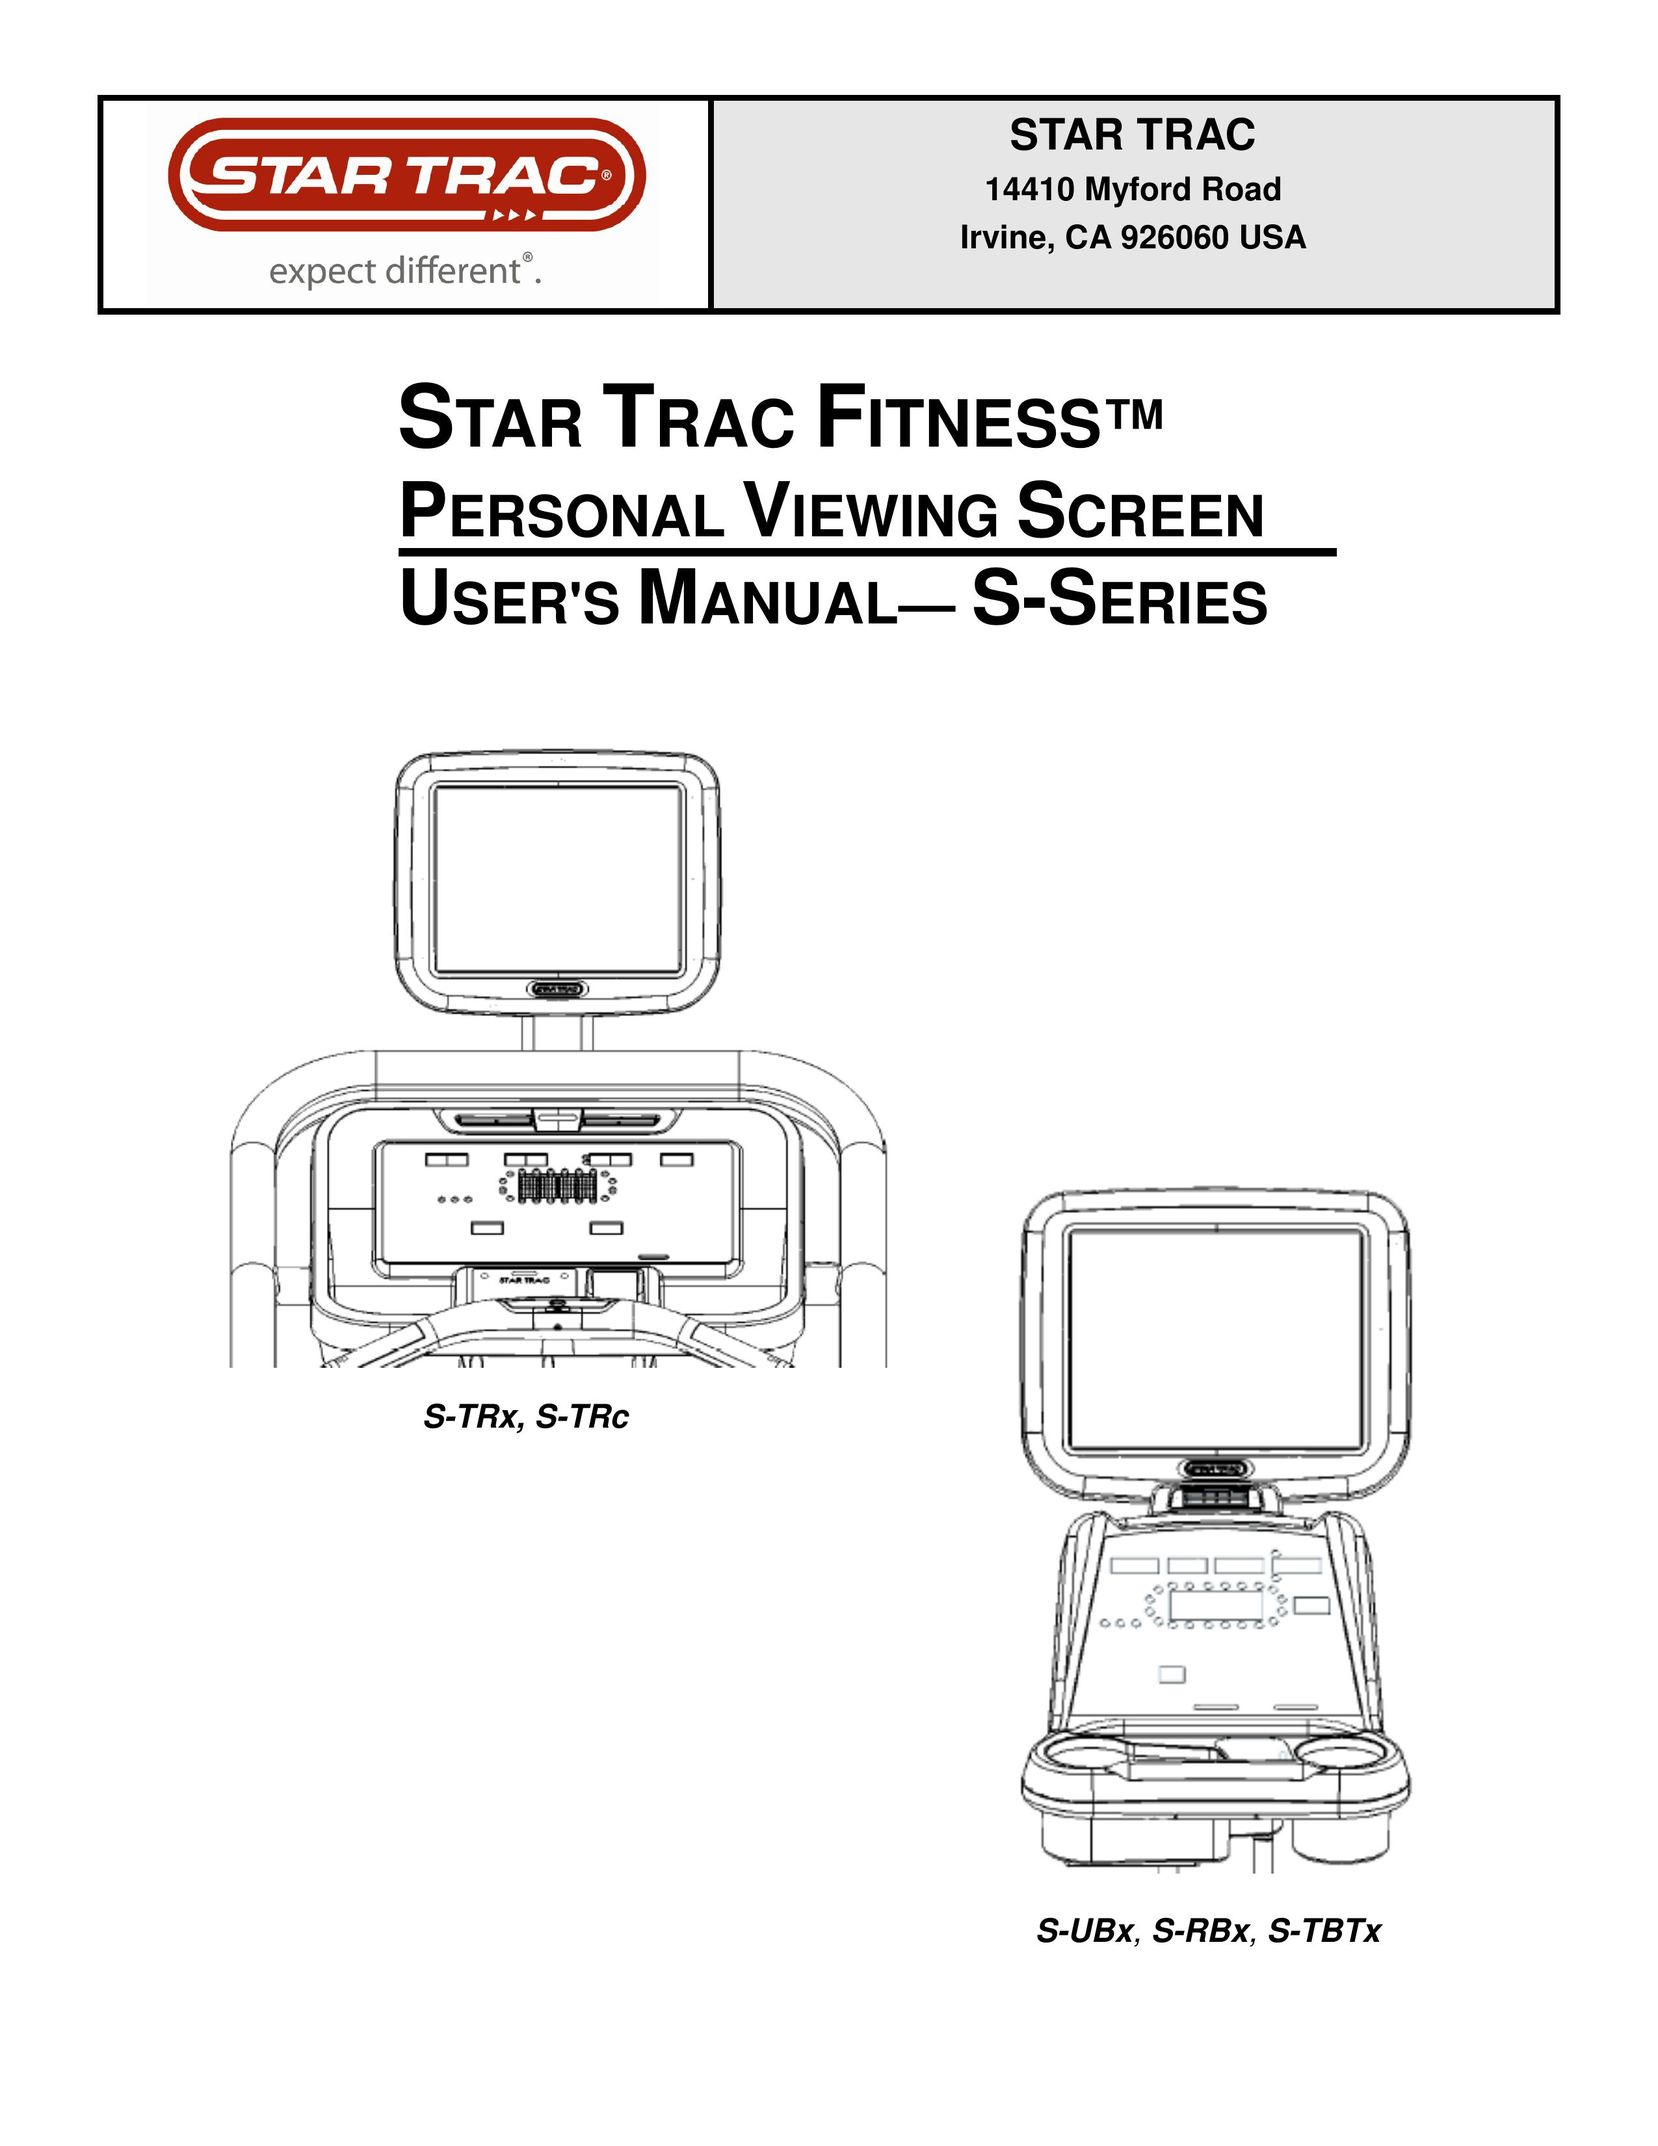 Star Trac S-RBX Fitness Electronics User Manual